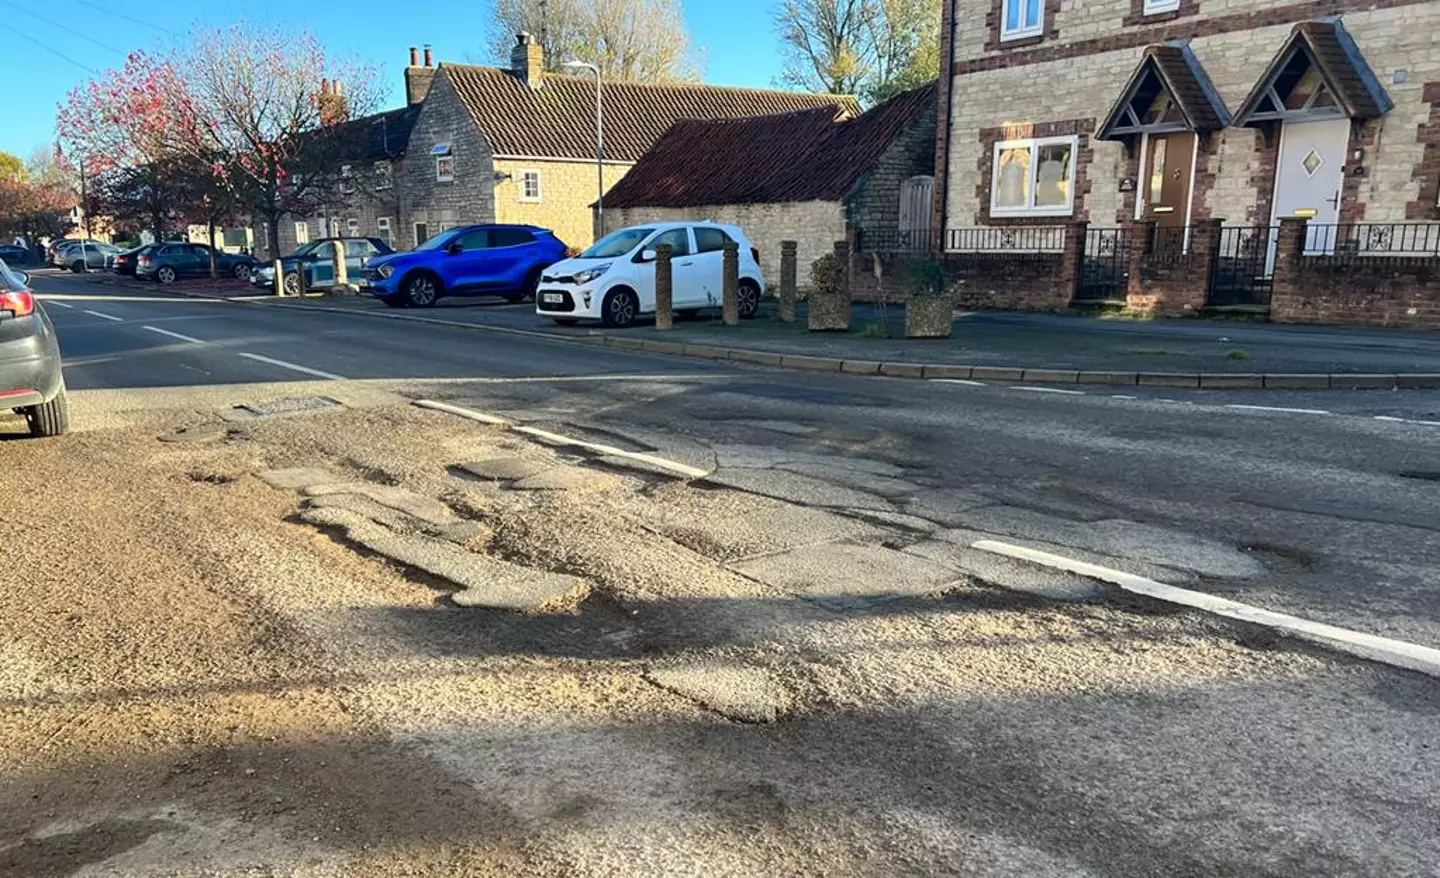 Ermine Street has been in a shocking state thanks to all the potholes.